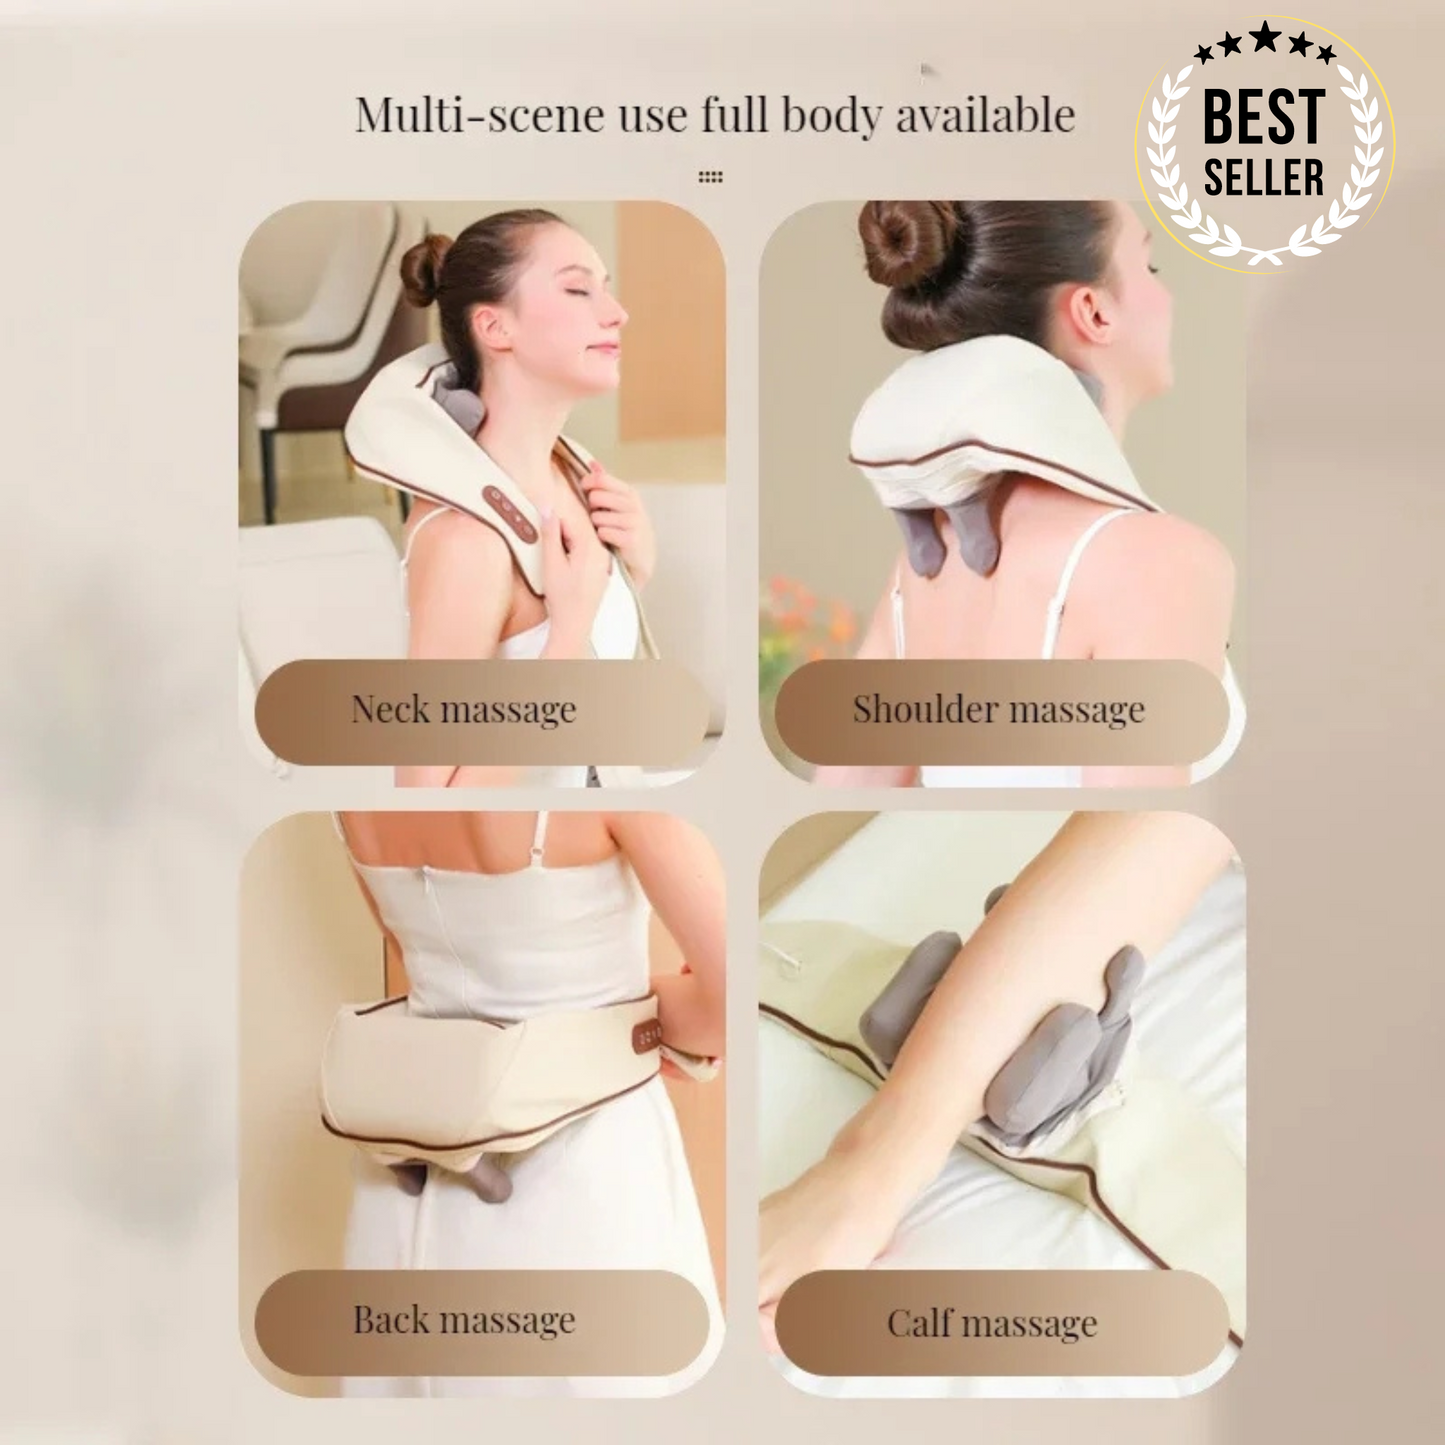 PostureFlex™ Shoulder Pain Relief Massager: Say Goodbye to Discomfort"
"PostureFlex™ Heat Therapy Neck Massager: Gentle Warmth for Muscle Relaxation"